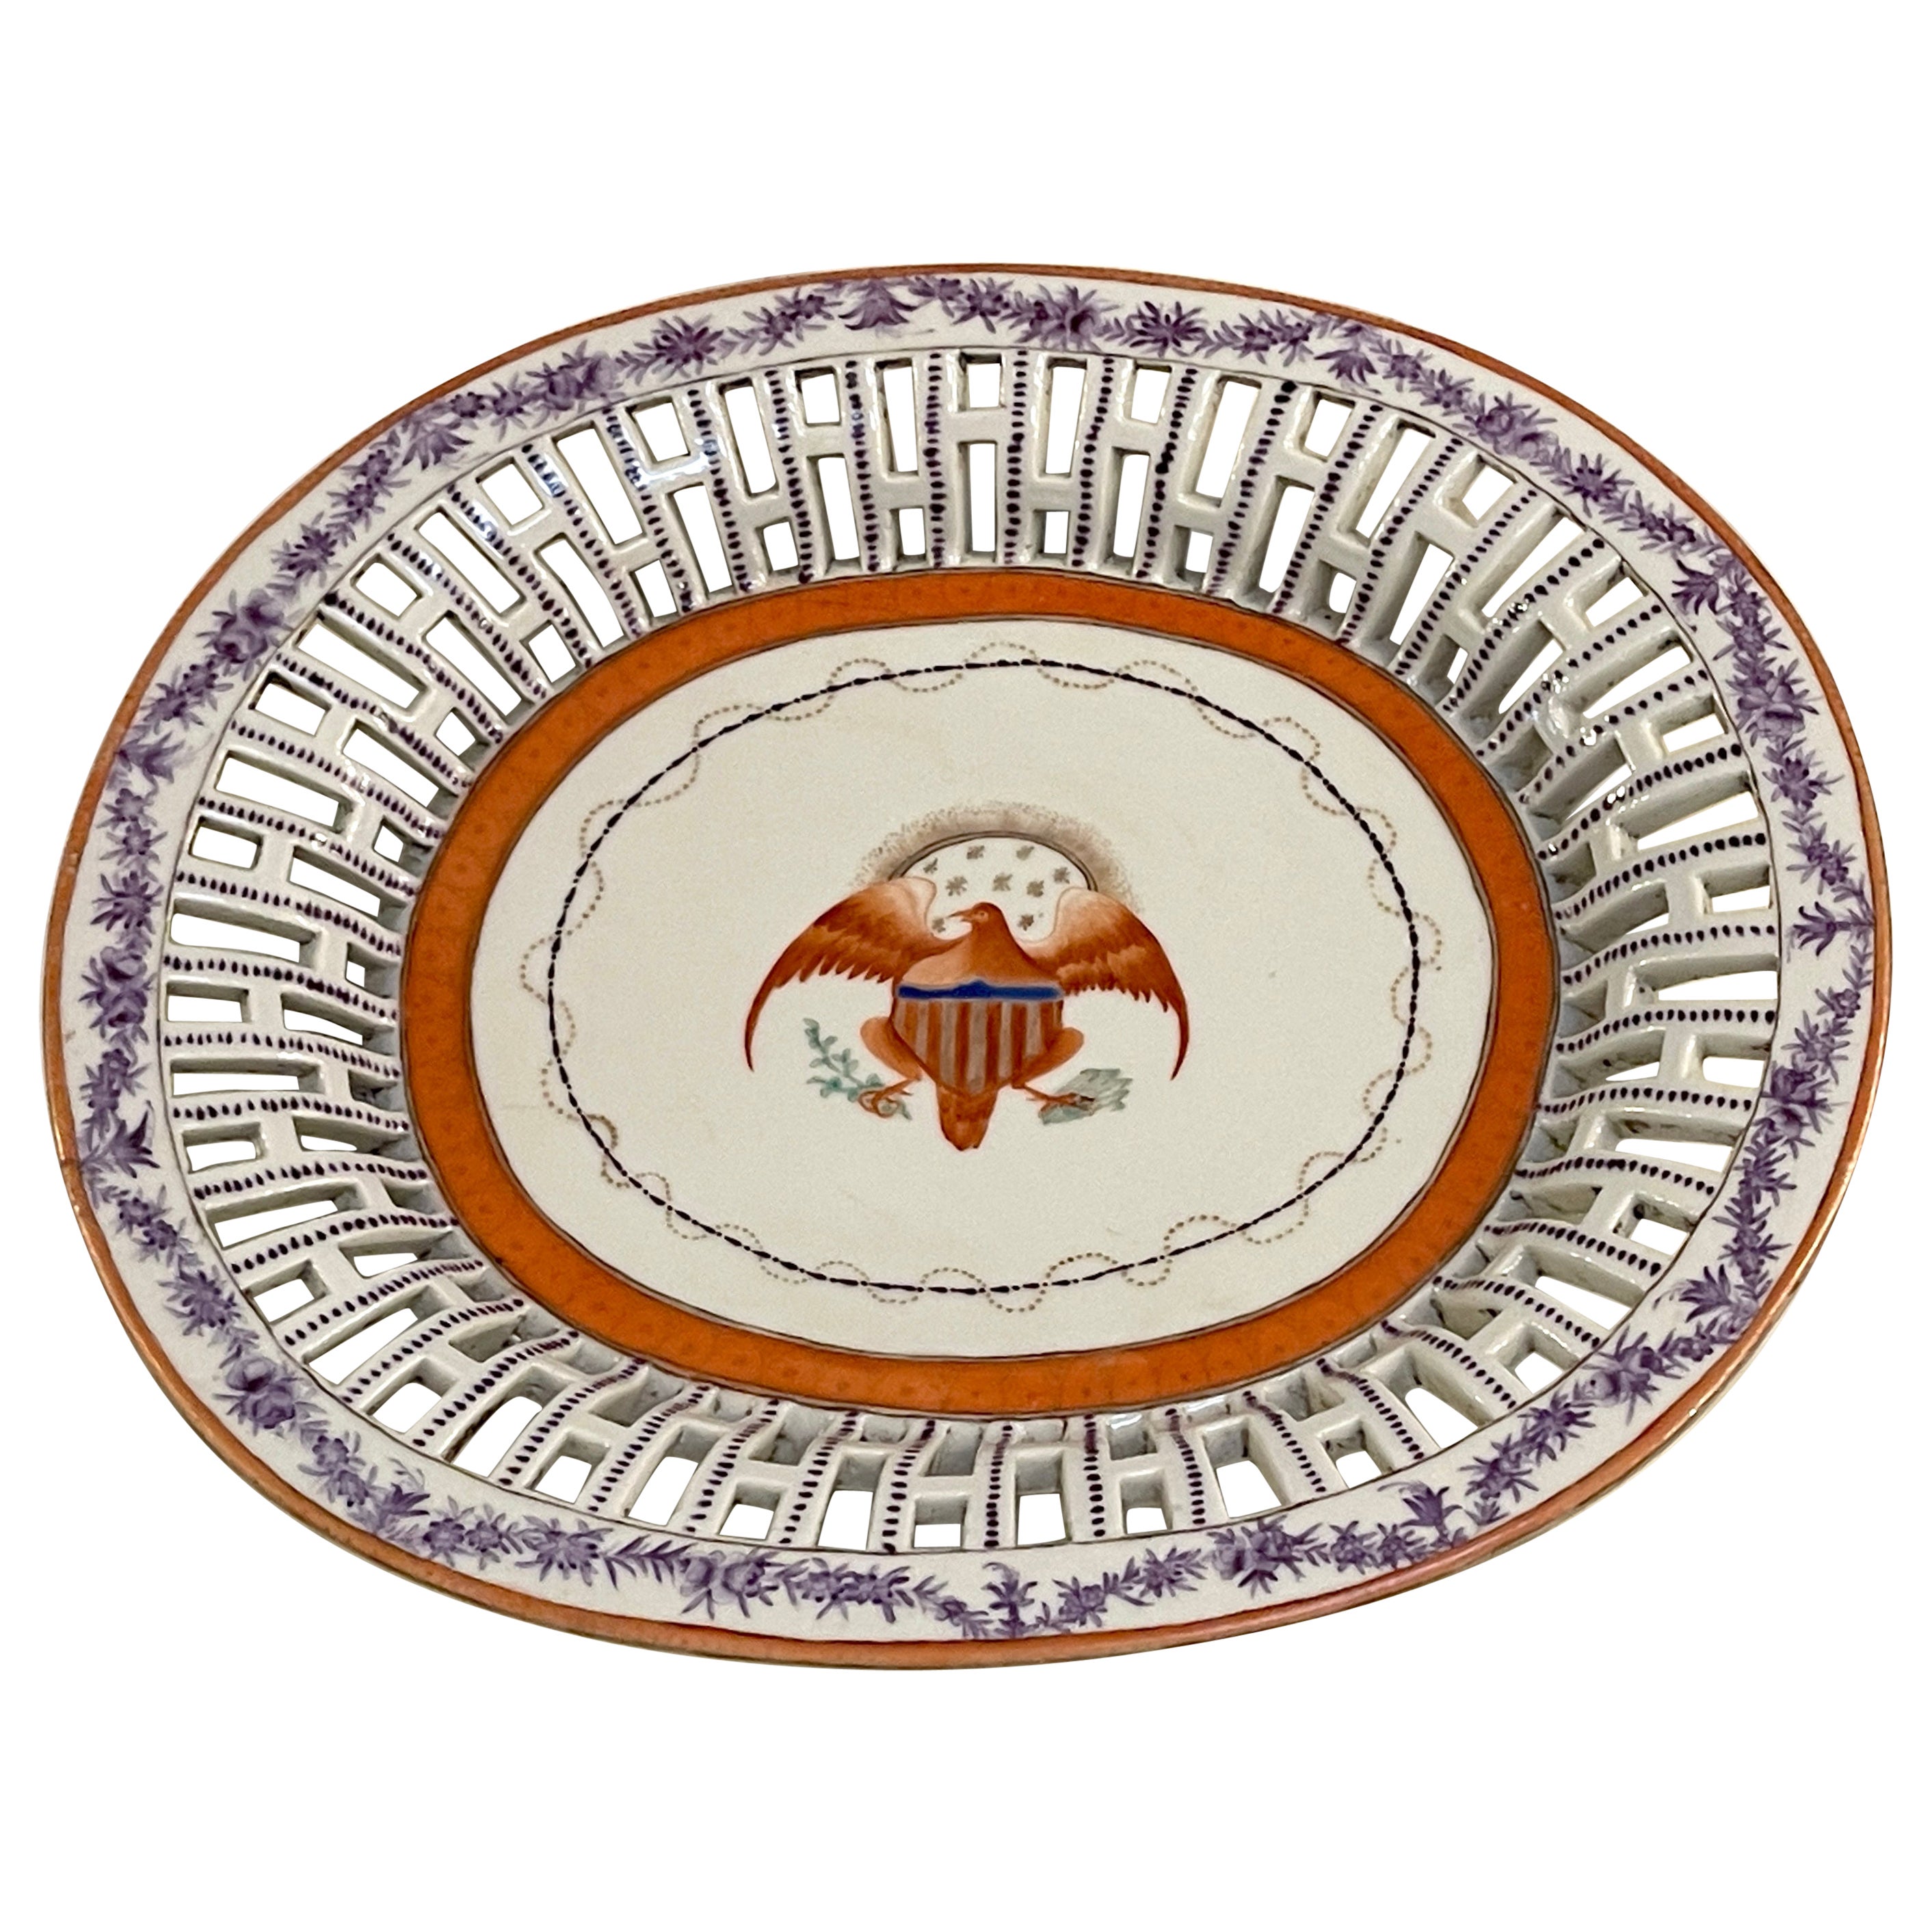 American Market Chinese Export Eagle Armorial Porcelain Oval Reticulated Tray